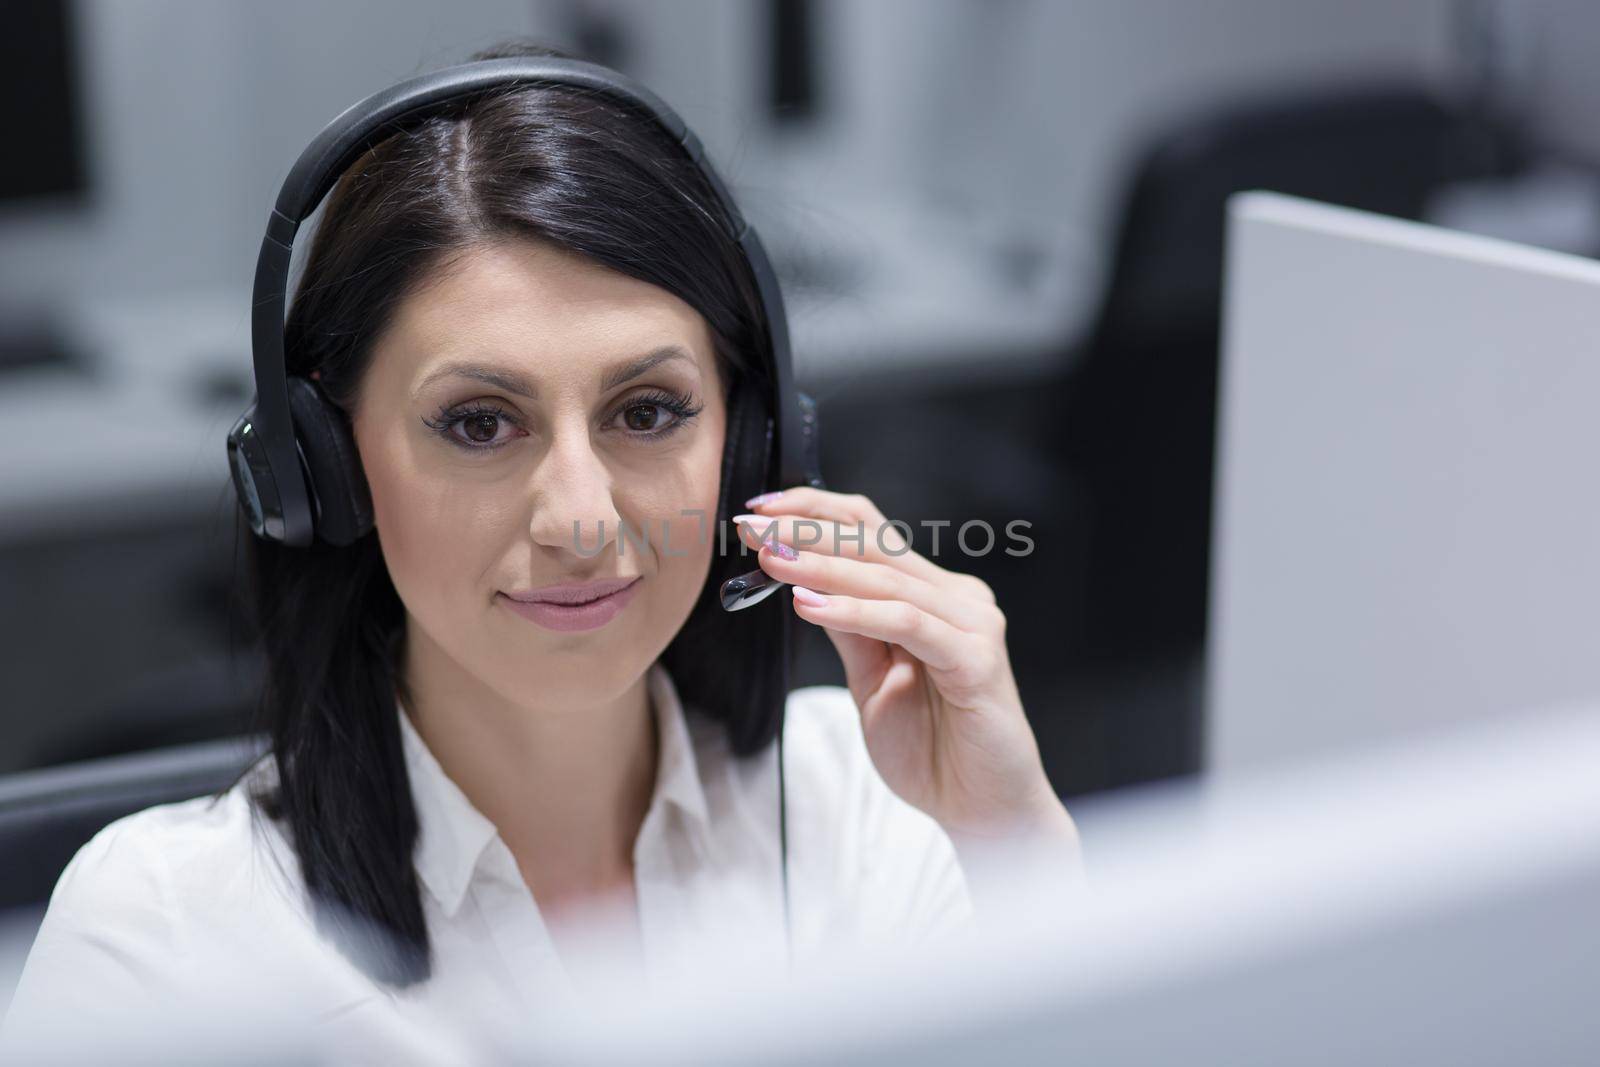 young smiling female call centre operator doing her job with a headset